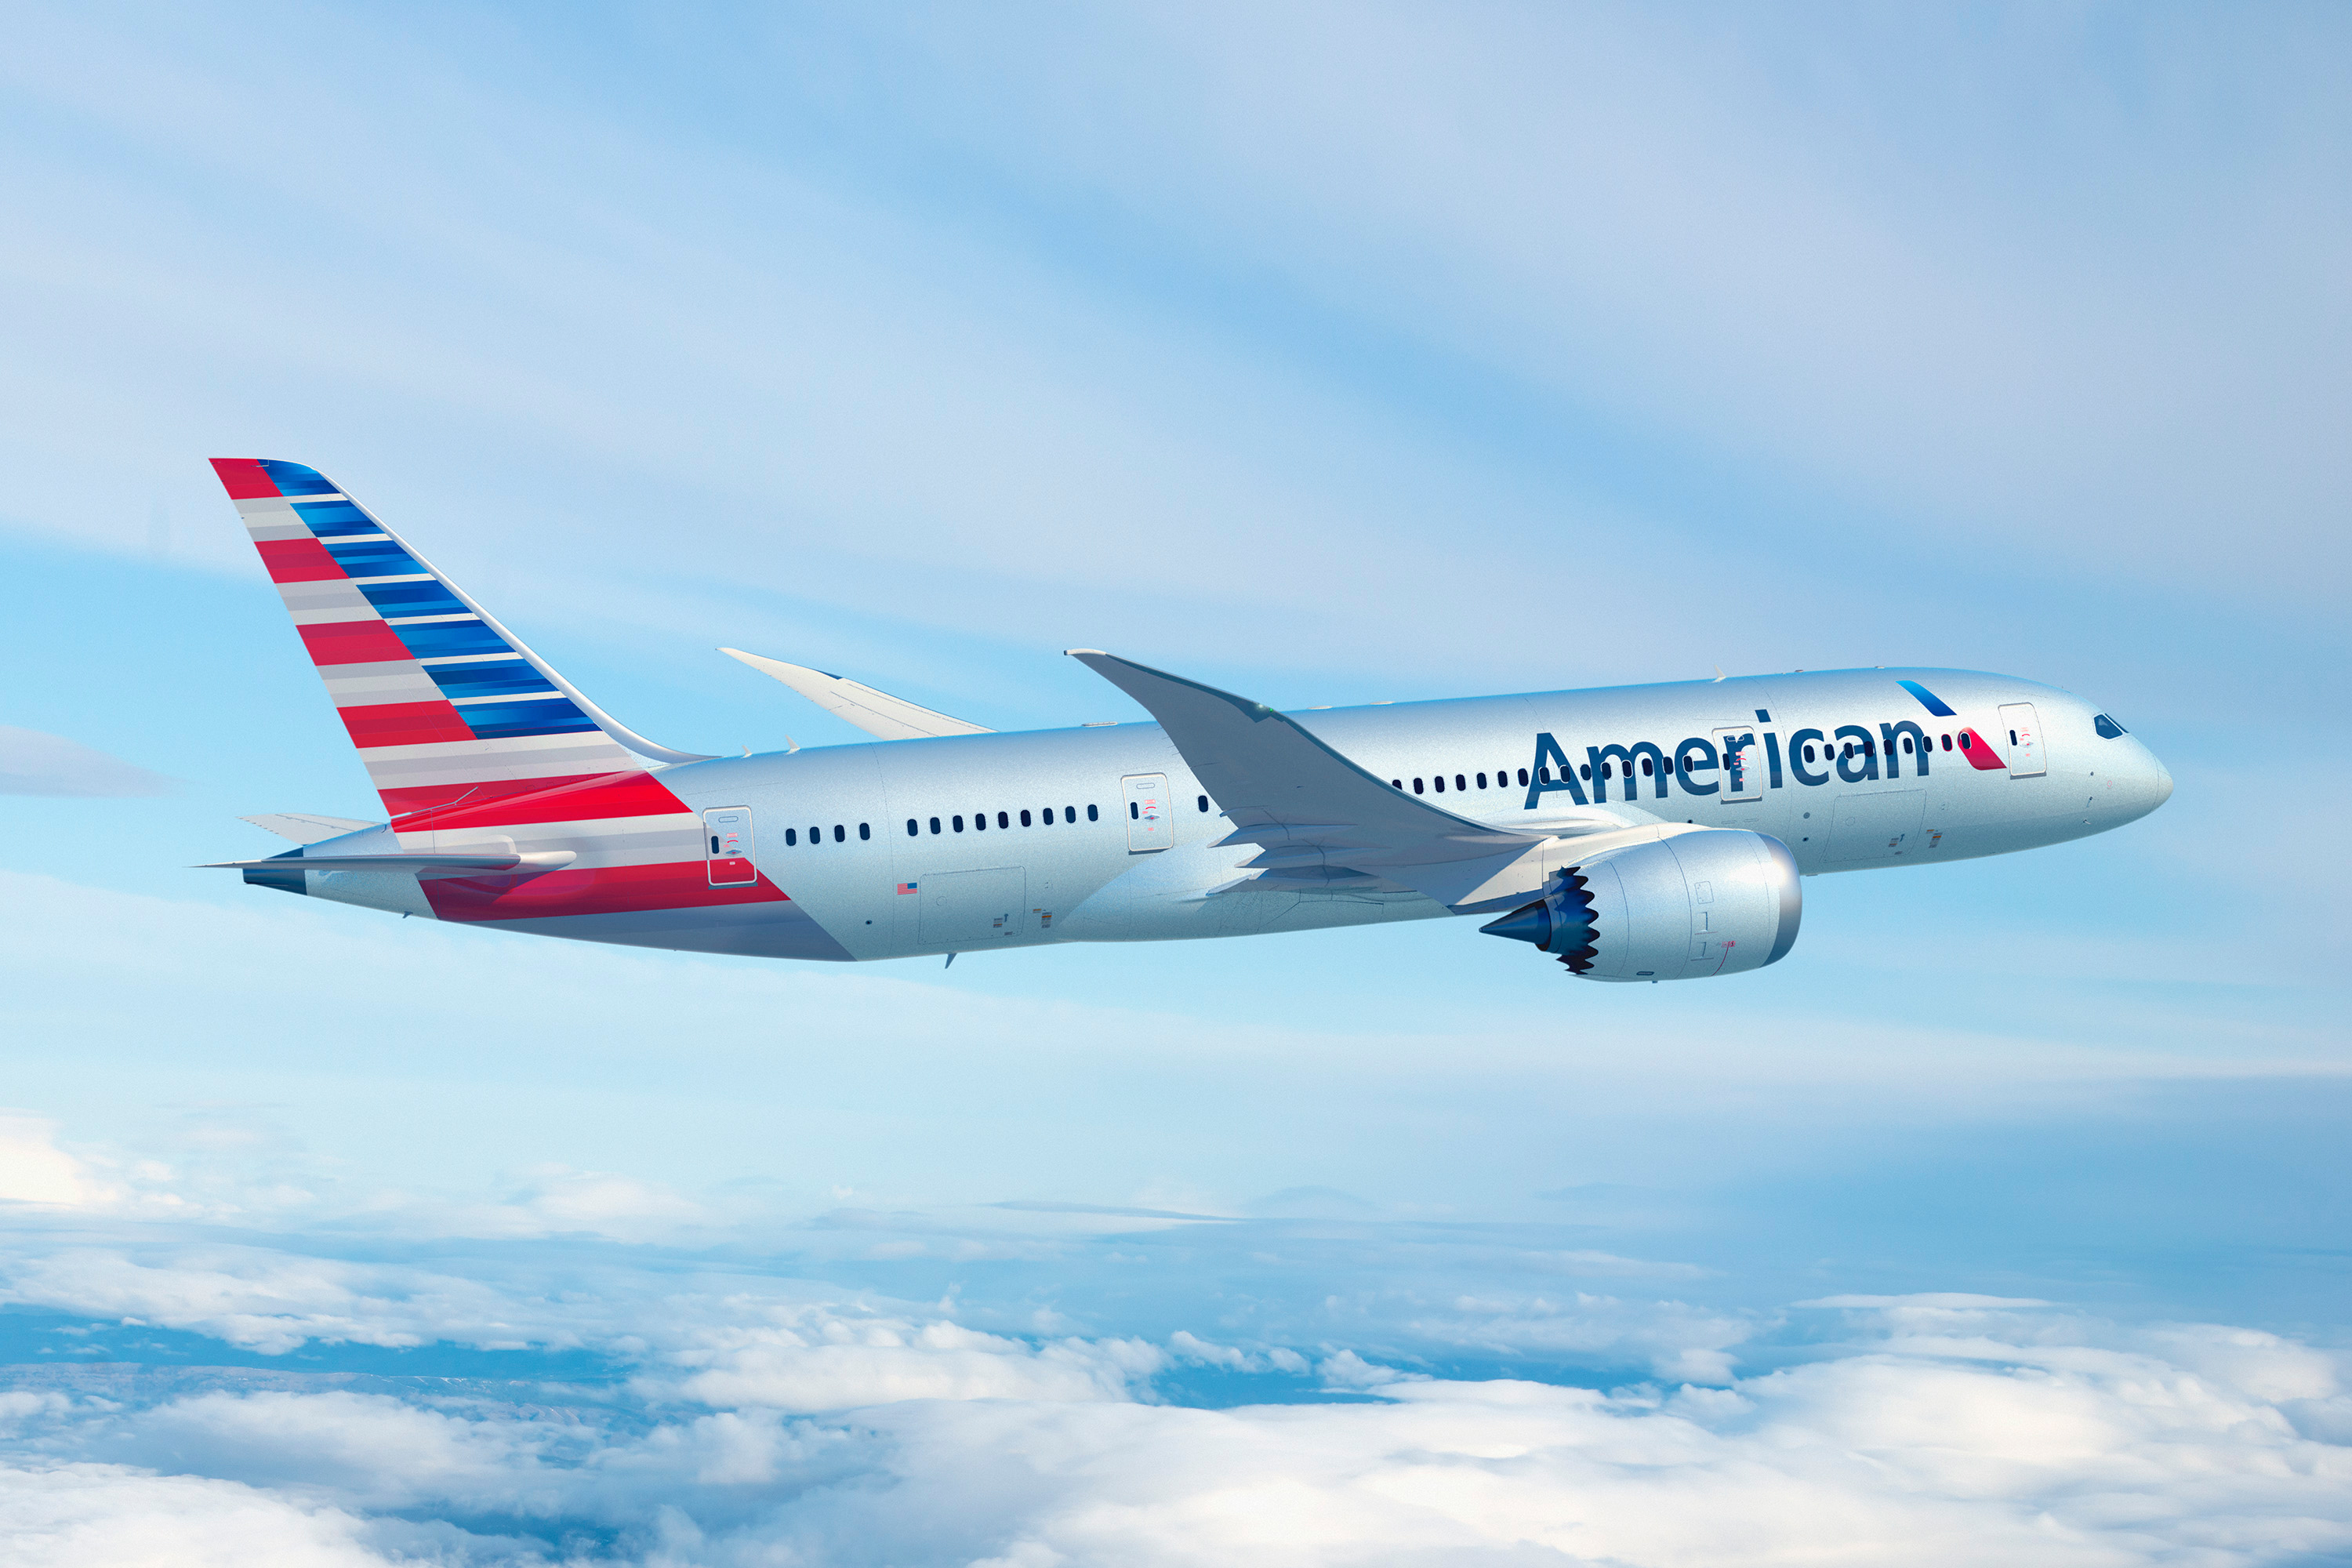 Best American Airlines Cards